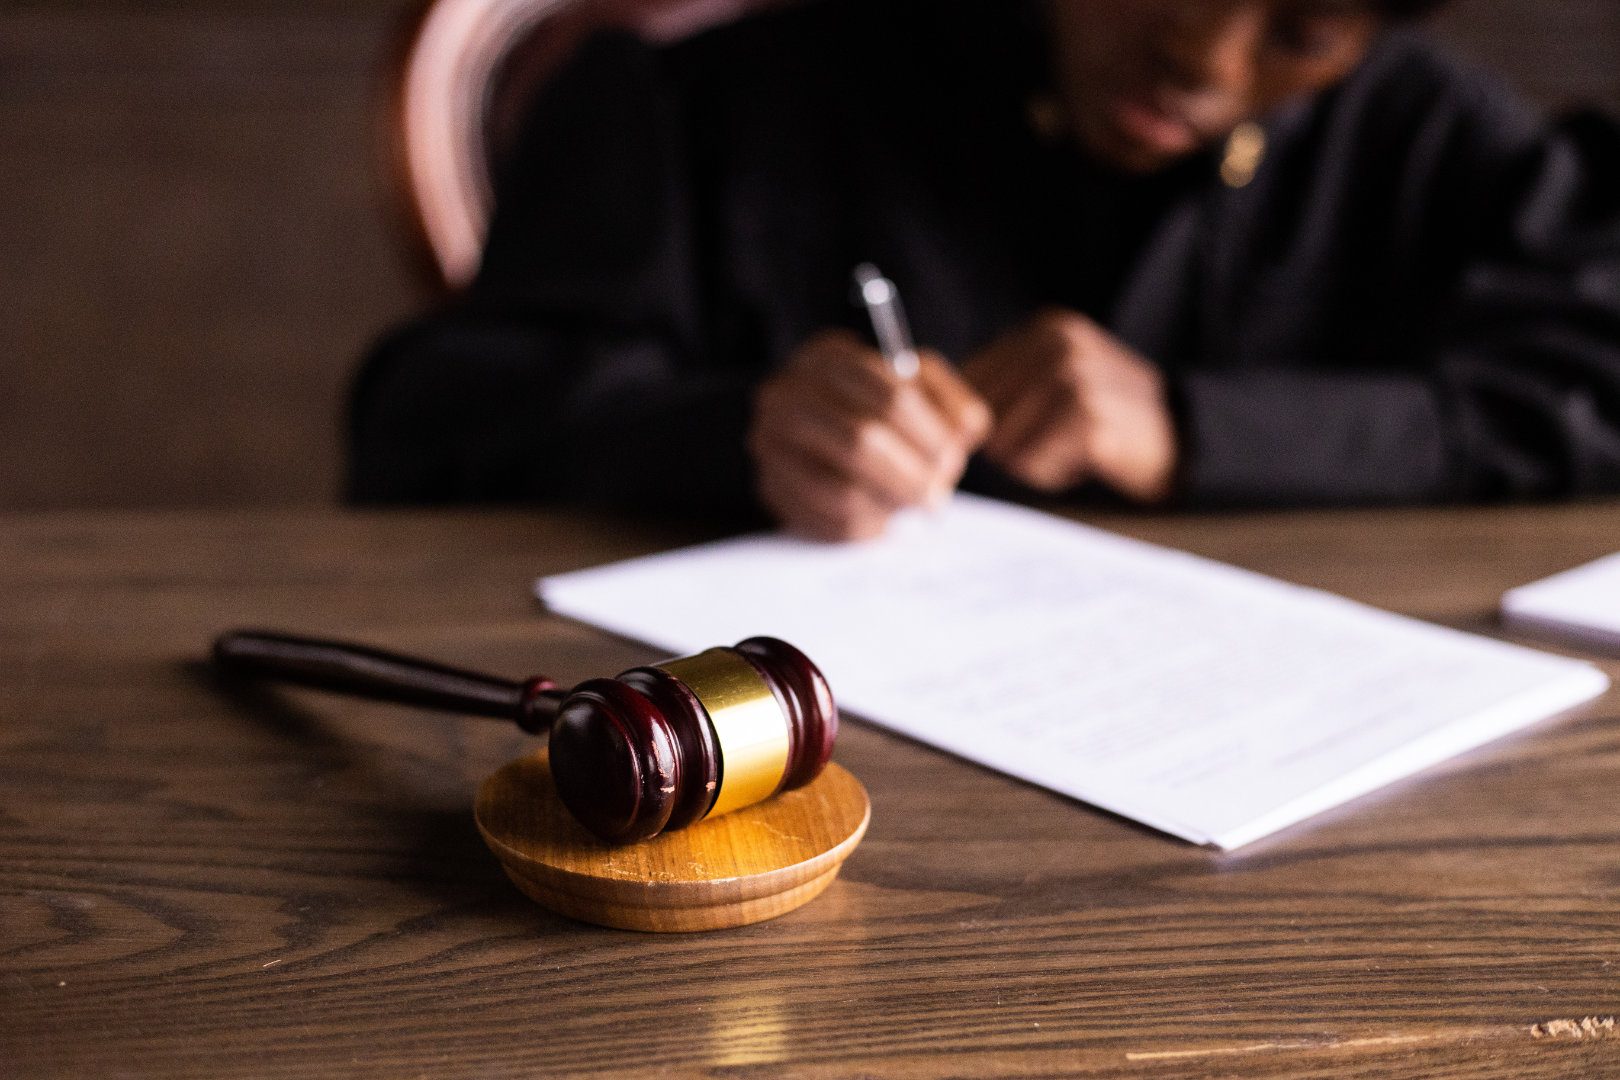 Person writing on a piece of paper with a gavel in the foreground